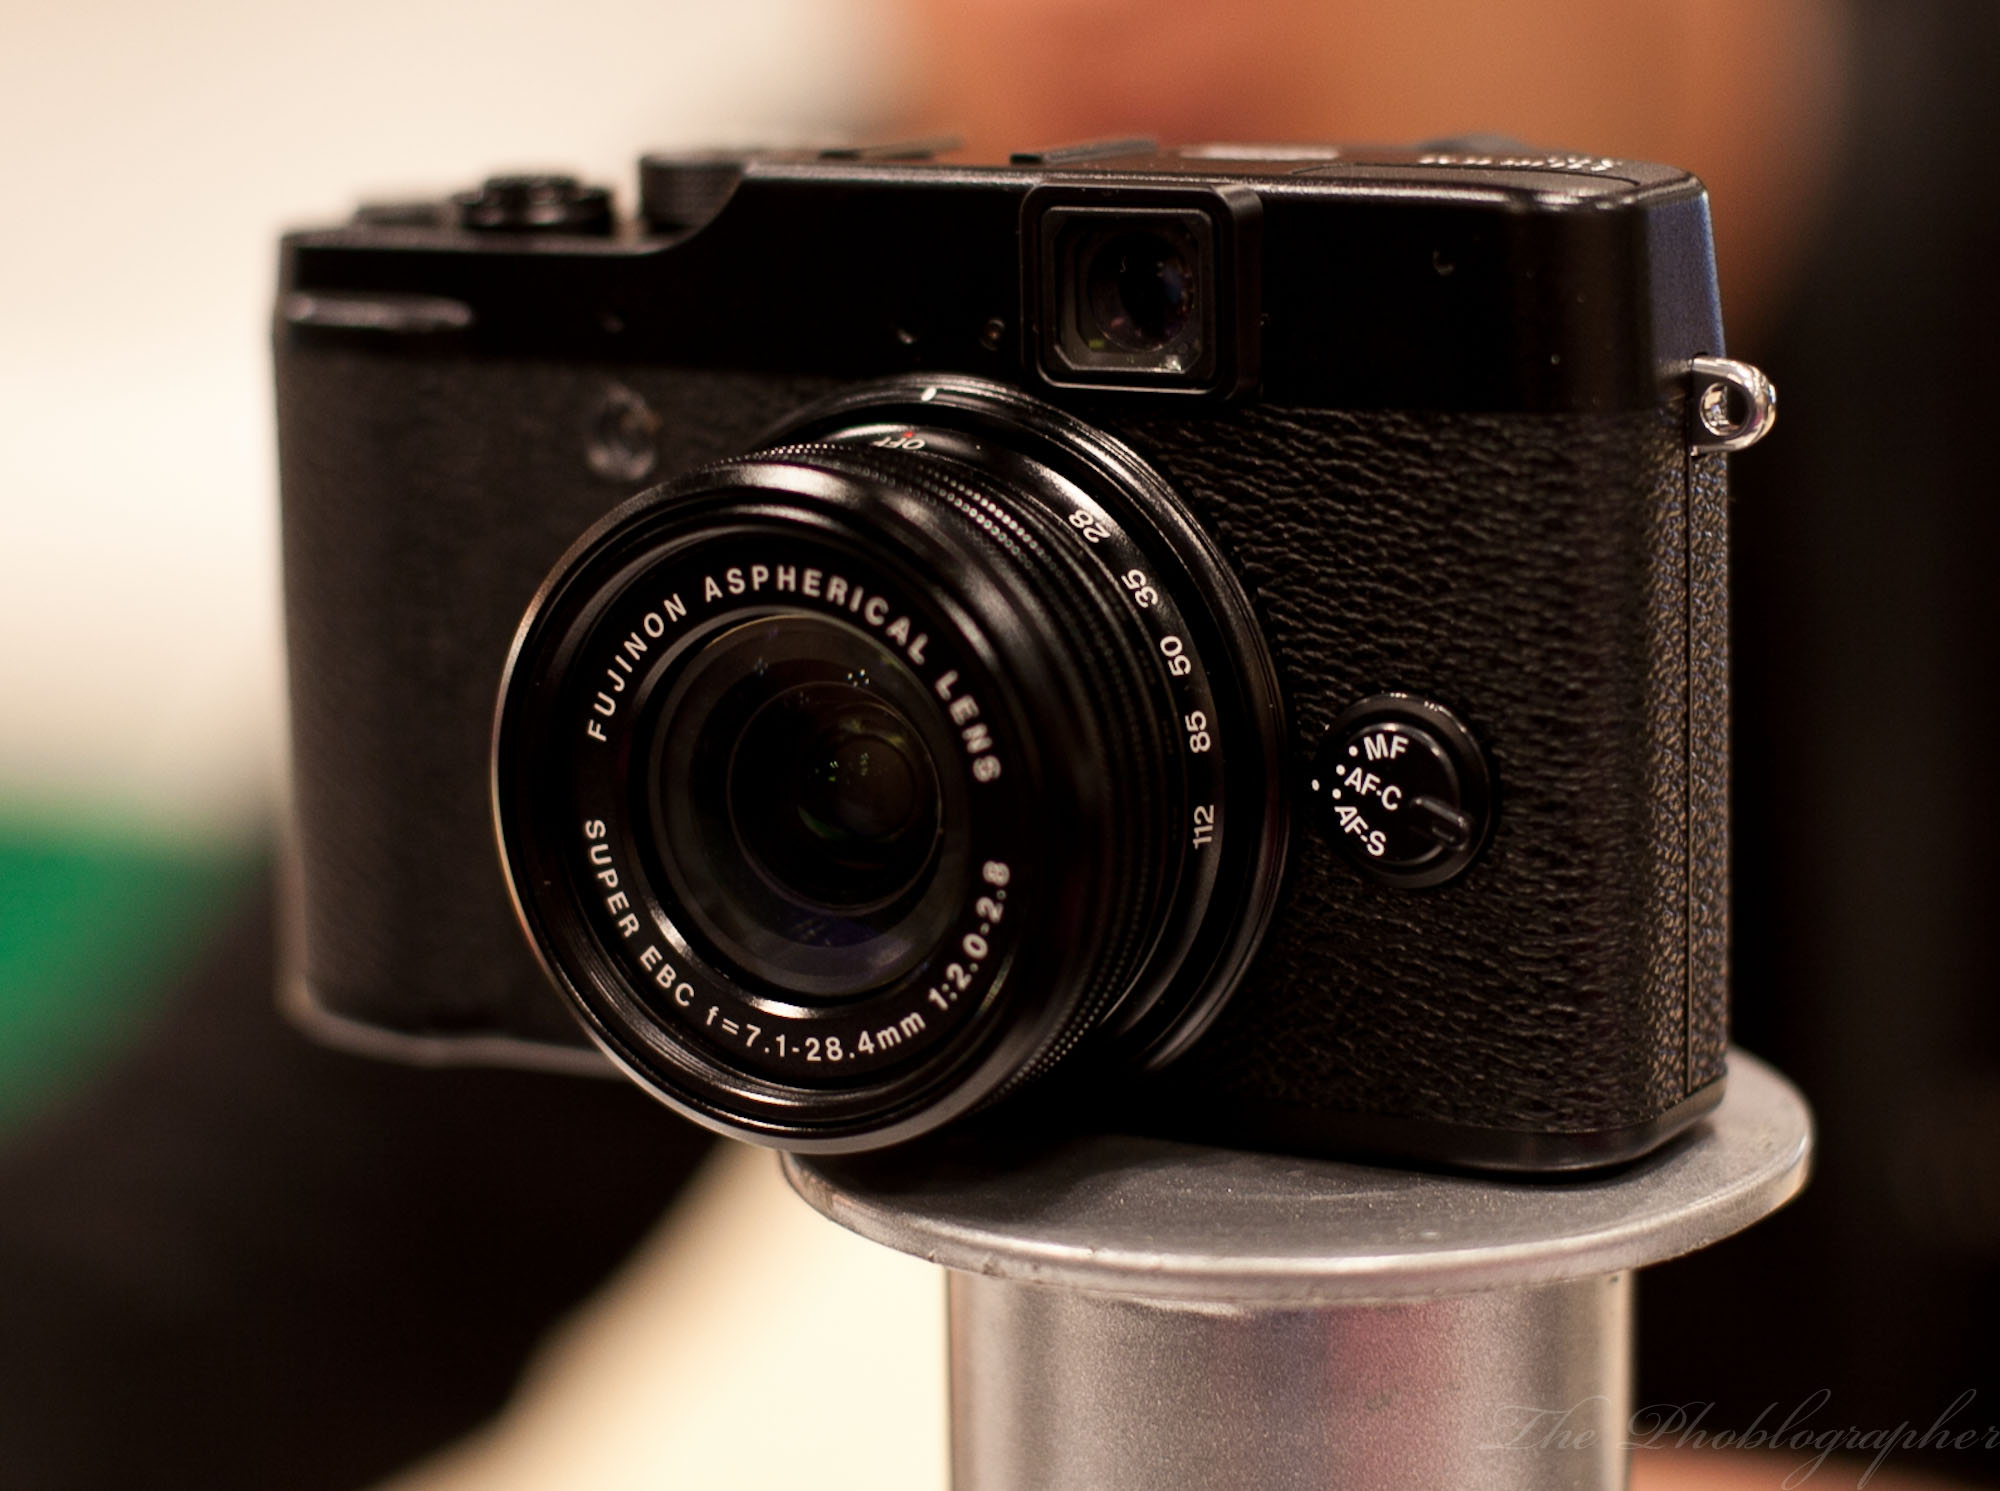 jam Gymnast Door EXCLUSIVE Hands On Review: Shooting a Party with the Fuji X10 - The  Phoblographer